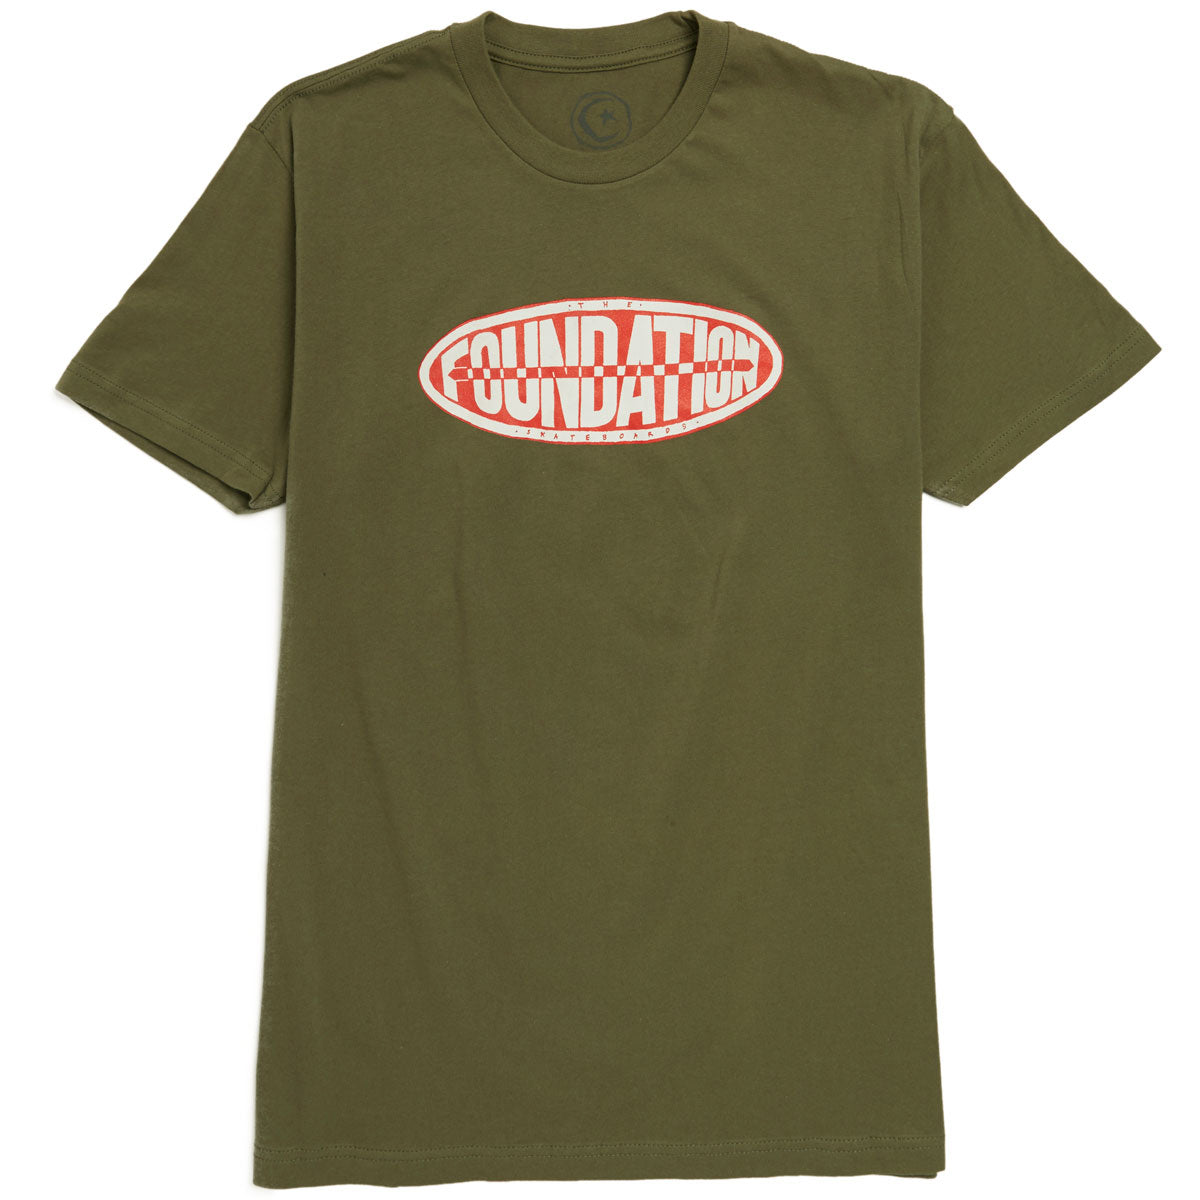 Foundation Oval T-Shirt - Military image 1